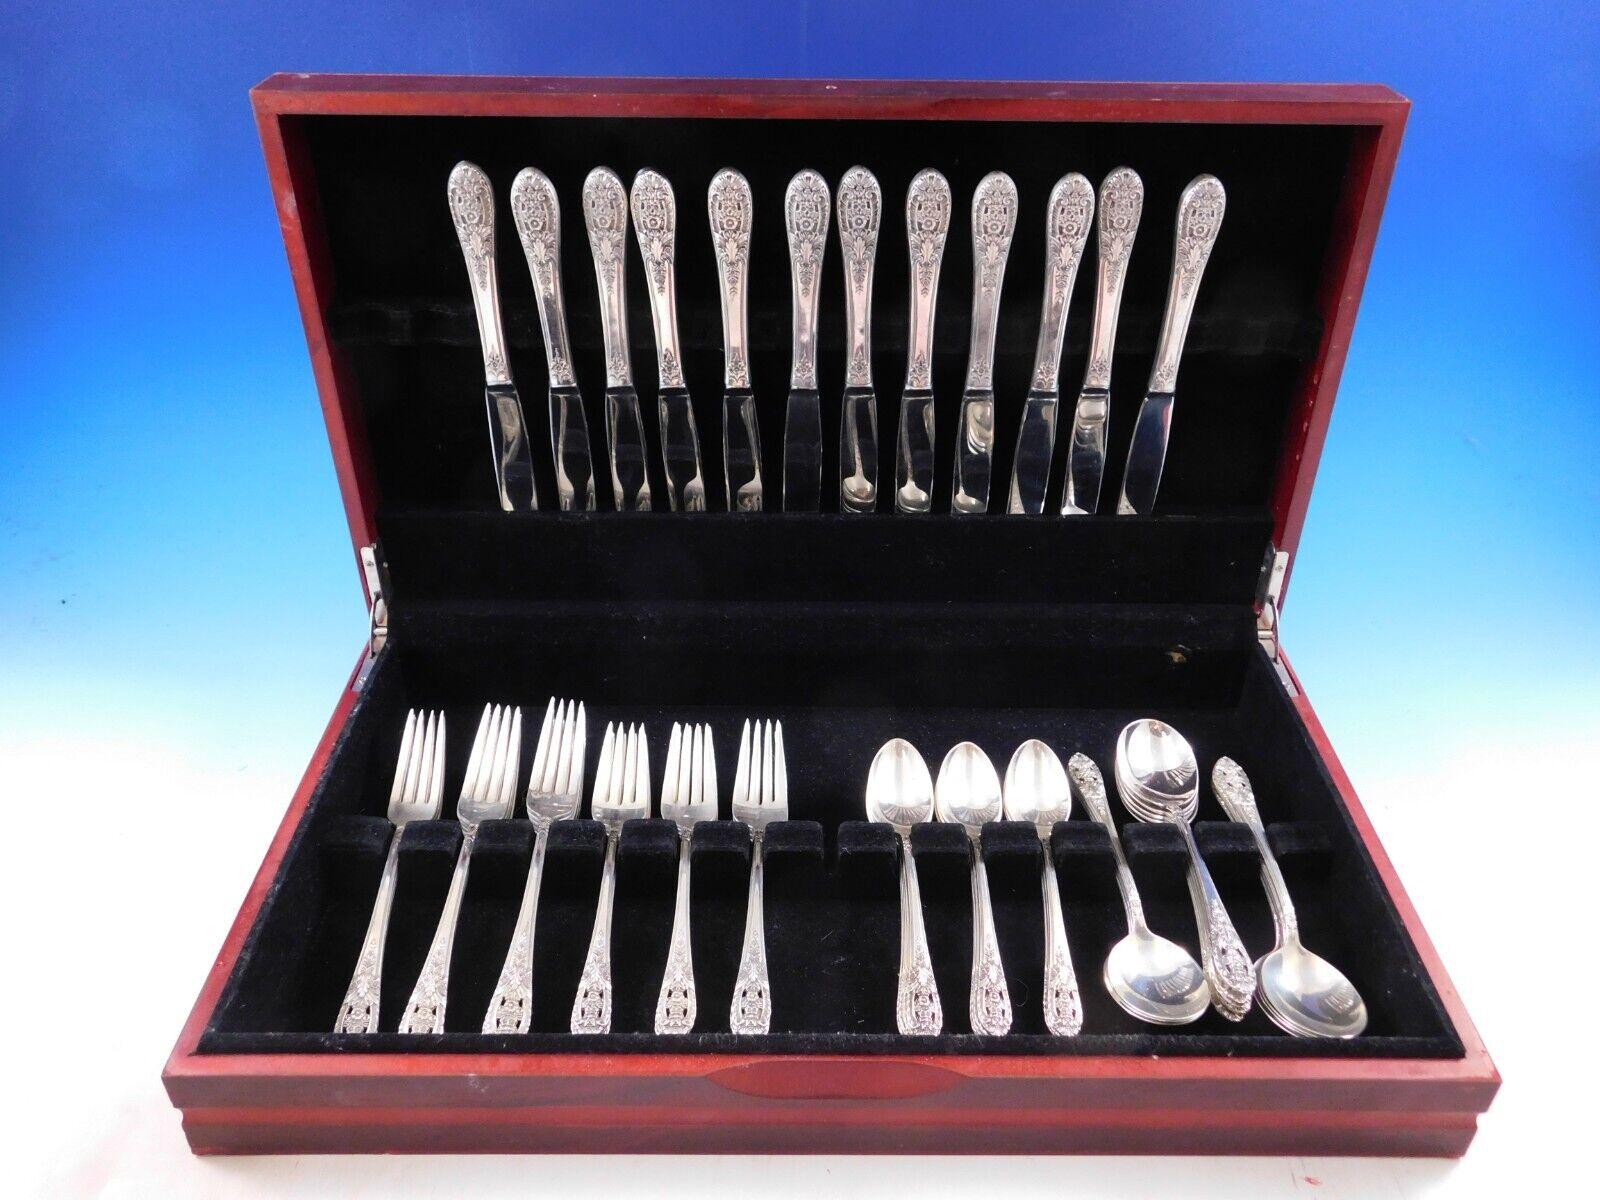 Crown Princess by International / Fine Arts sterling silver Flatware set - 60 pieces with unique pierced floral handles. This set includes:
 
12 Knives, 9 1/4